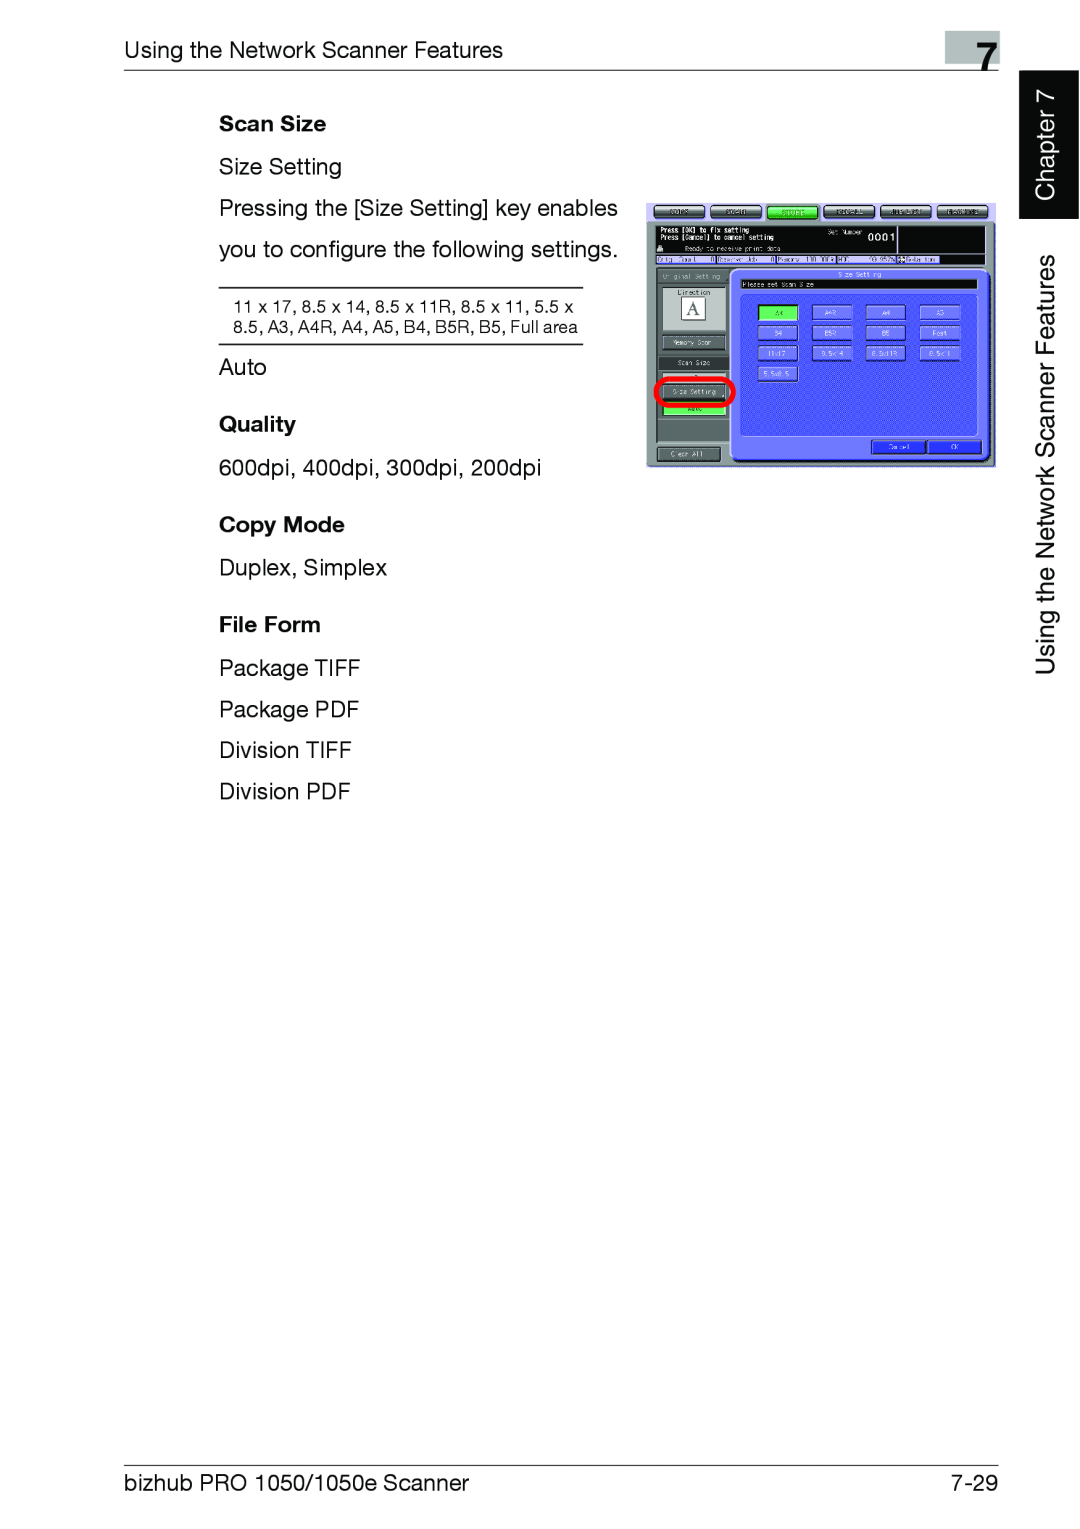 Konica Minolta 1050E appendix Quality, File Form, Chapter, Using the Network Scanner Features, Scan Size, Copy Mode 